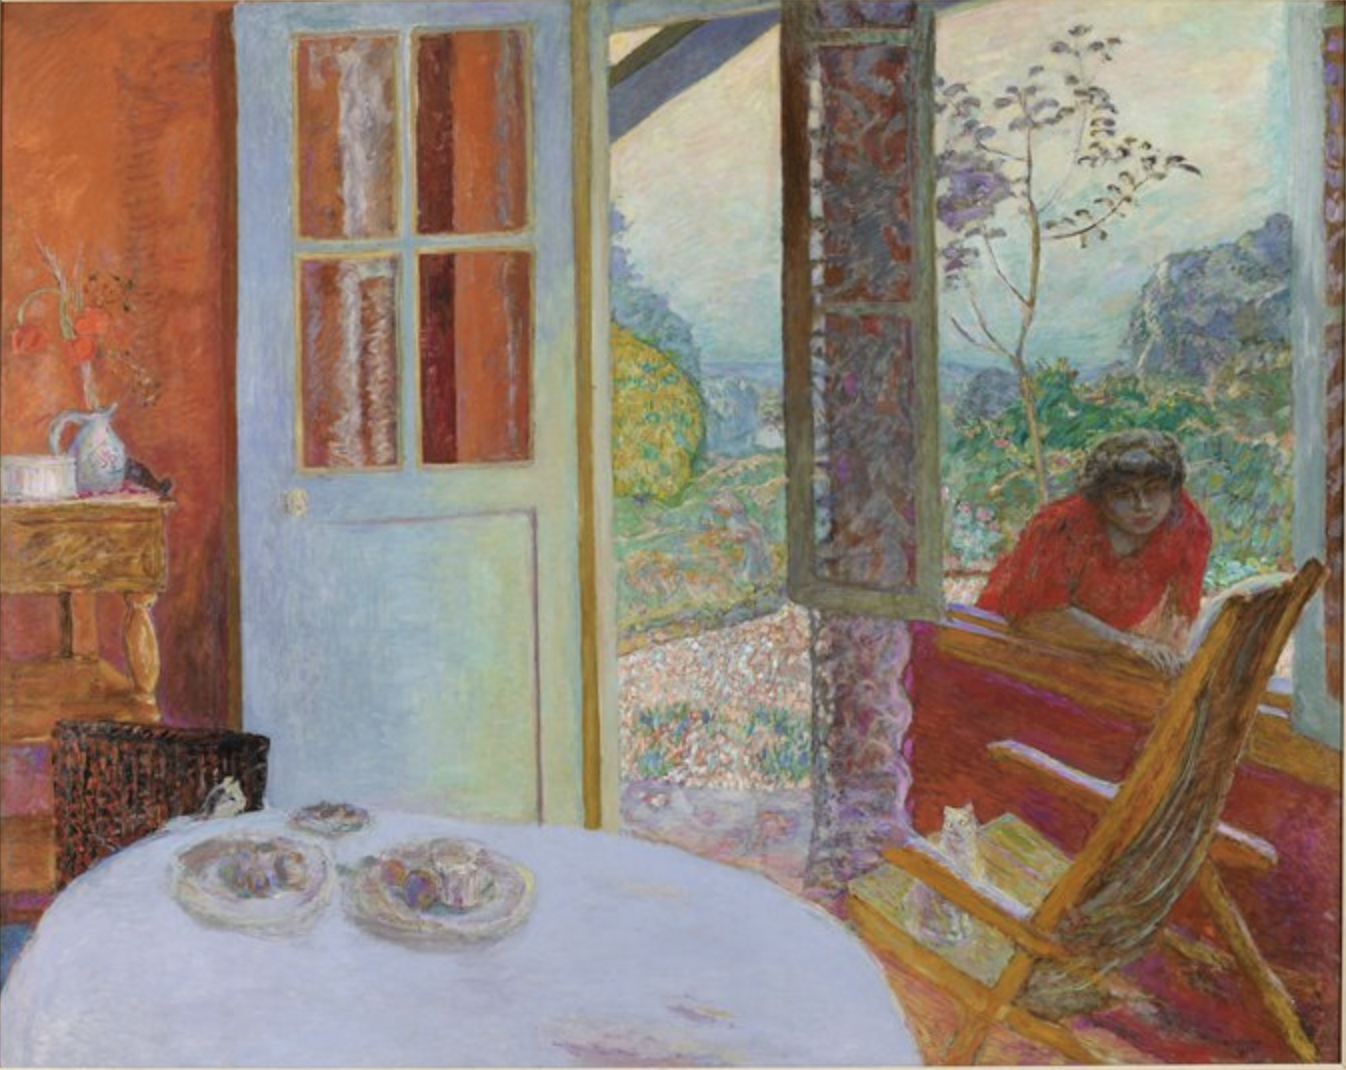 Pierre Bonnard, "Dining Room in the Country," 1913, oil on canvas, 164.47 x 205.74 cm, Minneapolis Institute of Art, Minneapolis, Minnesota, USA